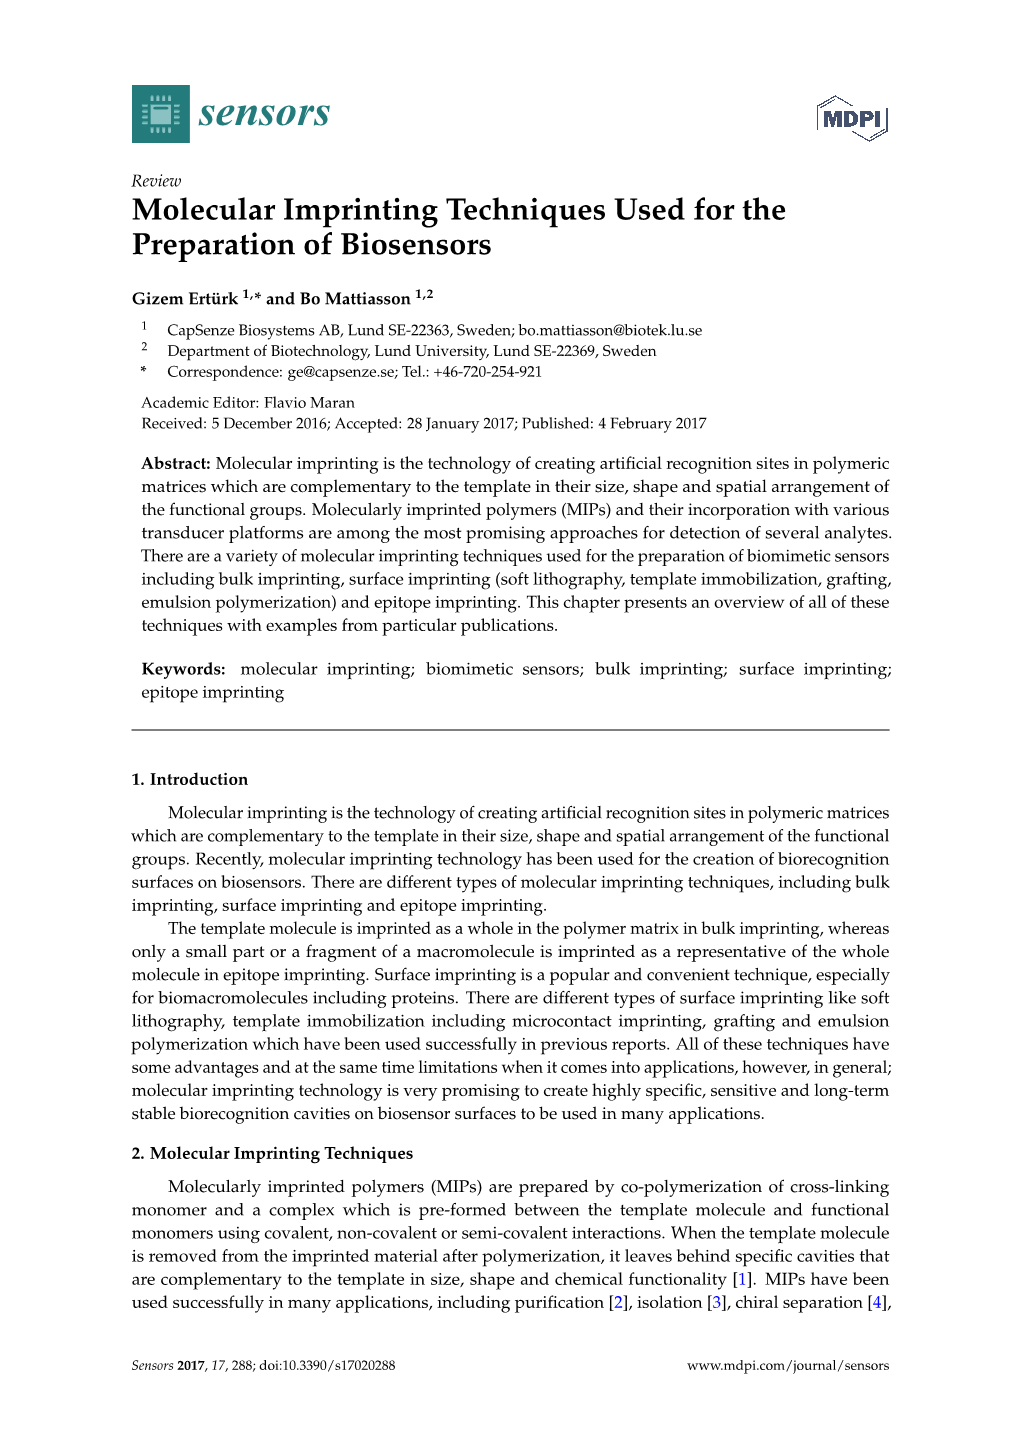 Molecular Imprinting Techniques Used for the Preparation of Biosensors